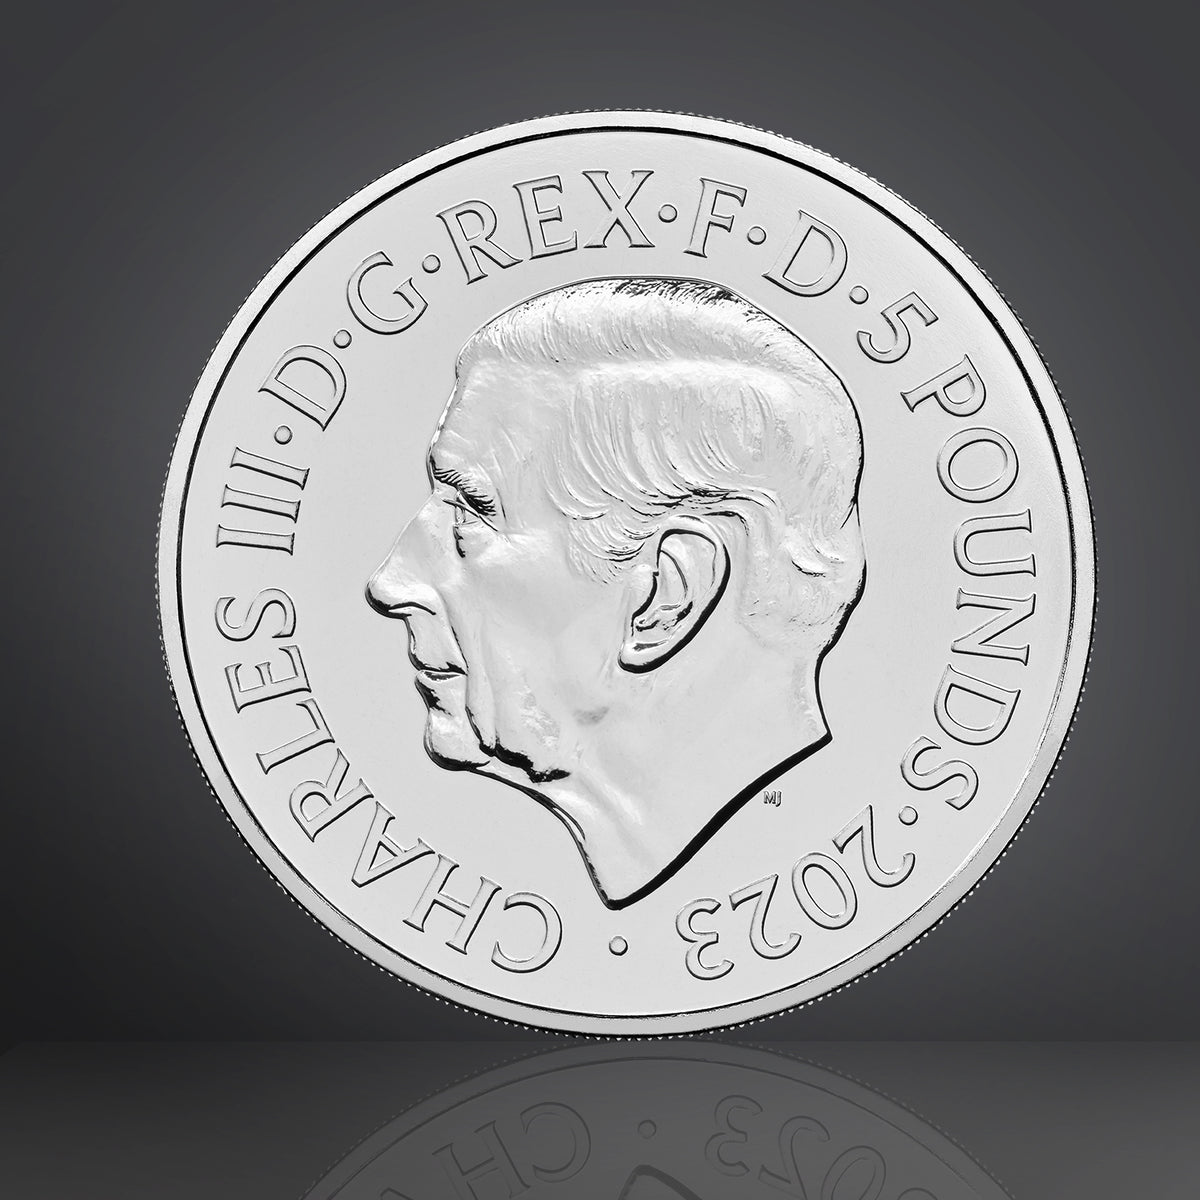 James Bond £5 Crown Brilliant Uncirculated Coin - 1970s Edition - by The Royal Mint